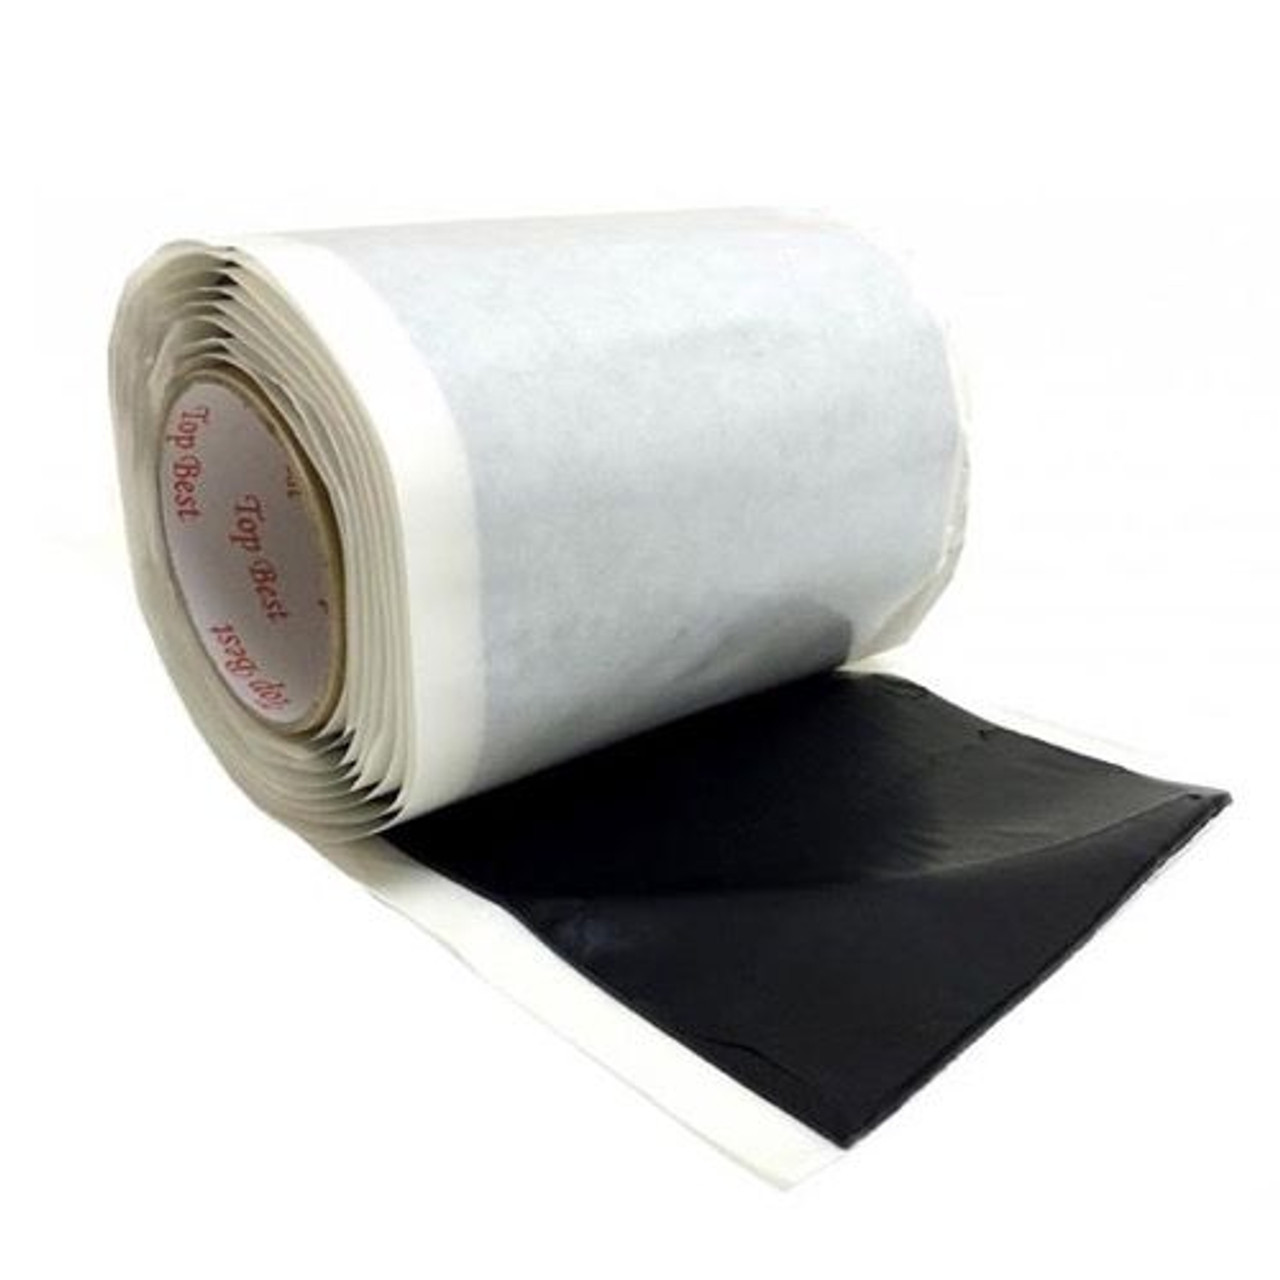 Eagle Self Seal Tape Mastic Roll 6 1/2" Inch Wide 10' Ft Long Bishop Tacky Black Flexible Large Pitch Pad Self Seal Tape Adhesive Insulating Weather-Proofing Moldable Reusable Non-Conducting Wrap